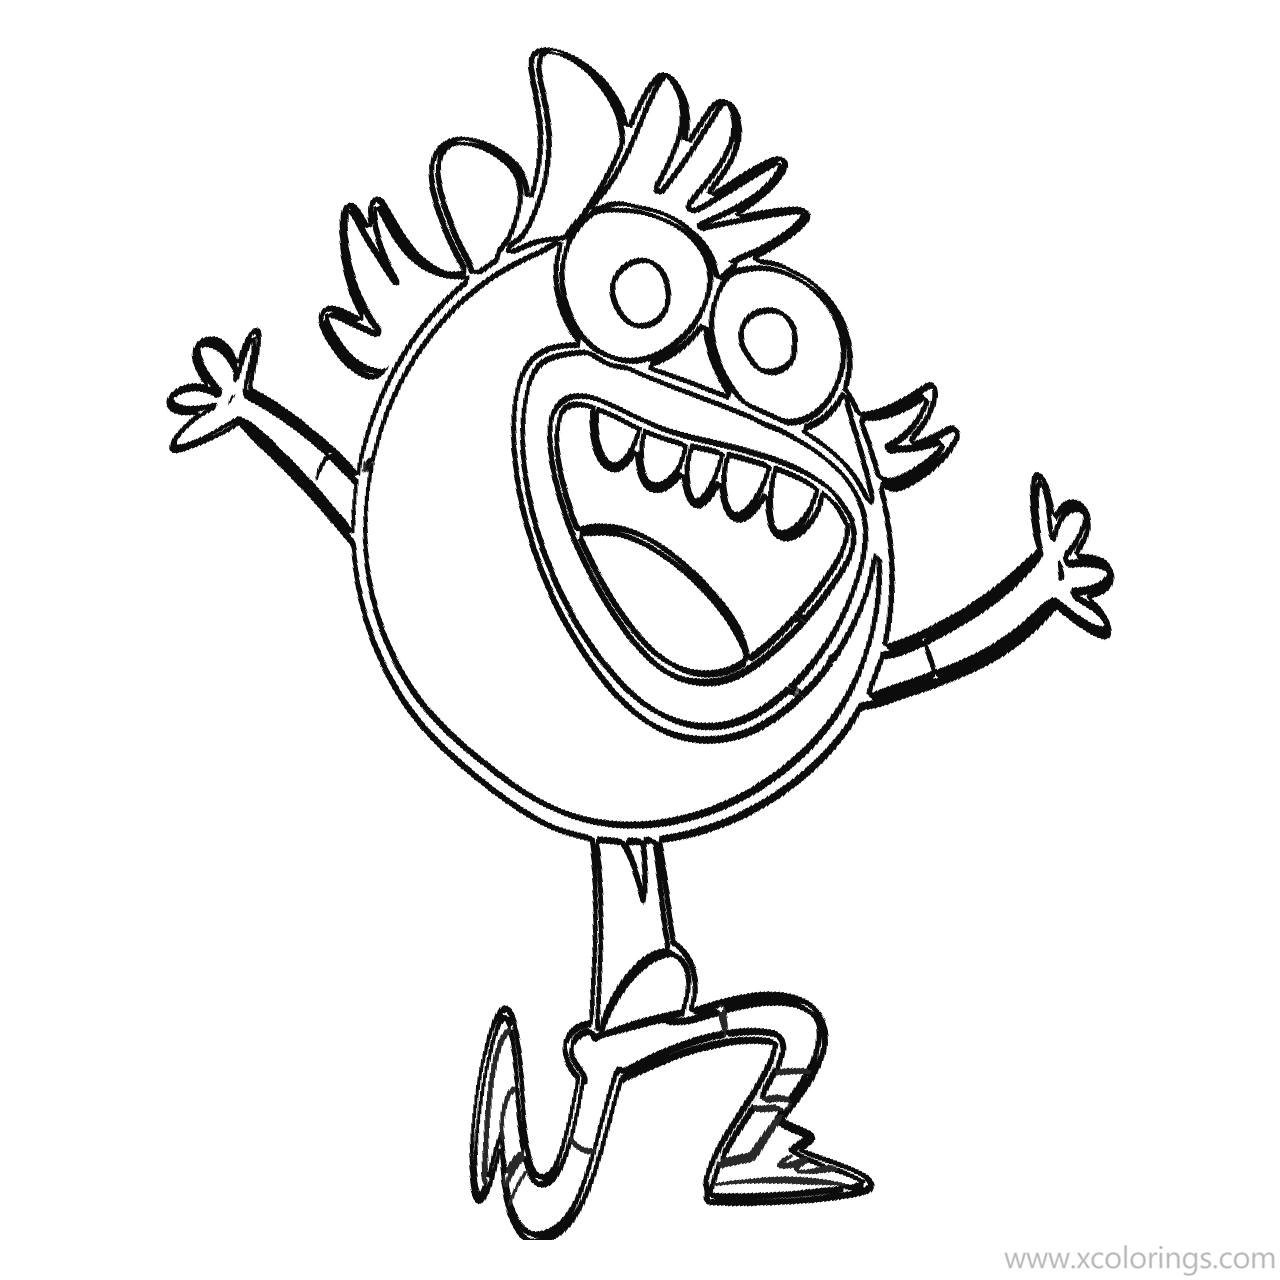 Free Breadwinners Coloring Pages SwaySway is Laughing printable